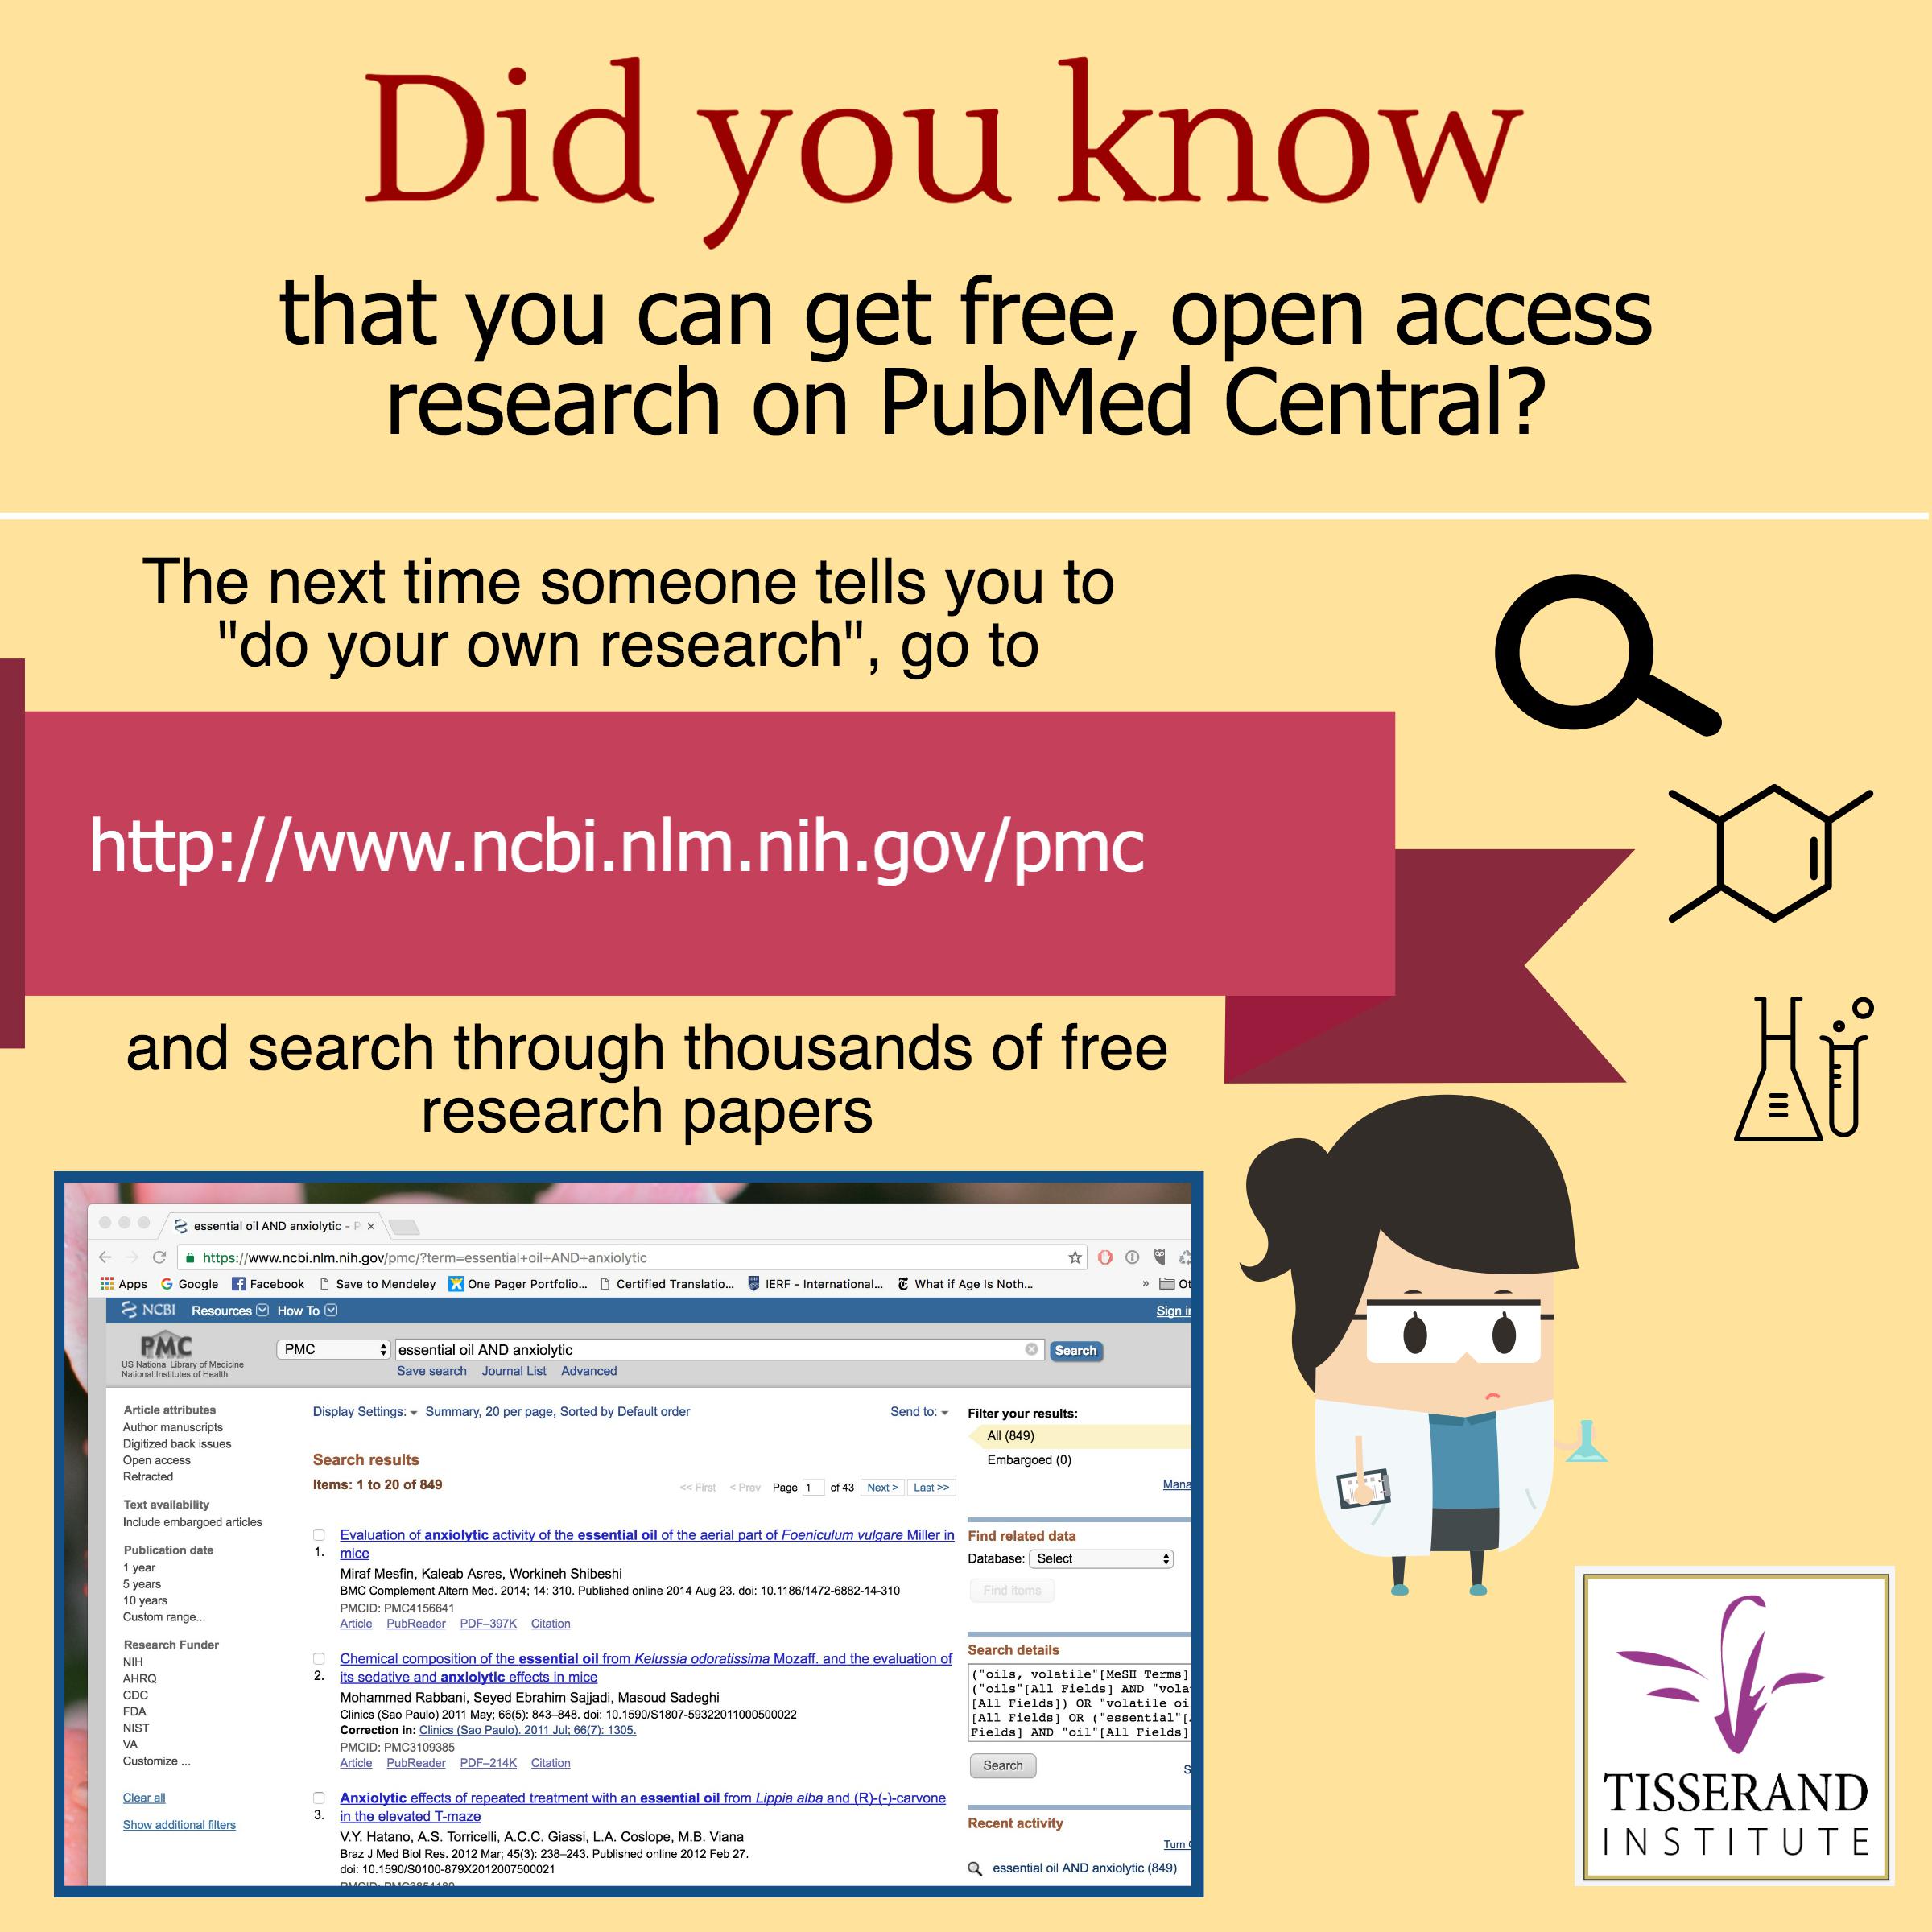 Free Research | Did you know that you can get free, open access research?